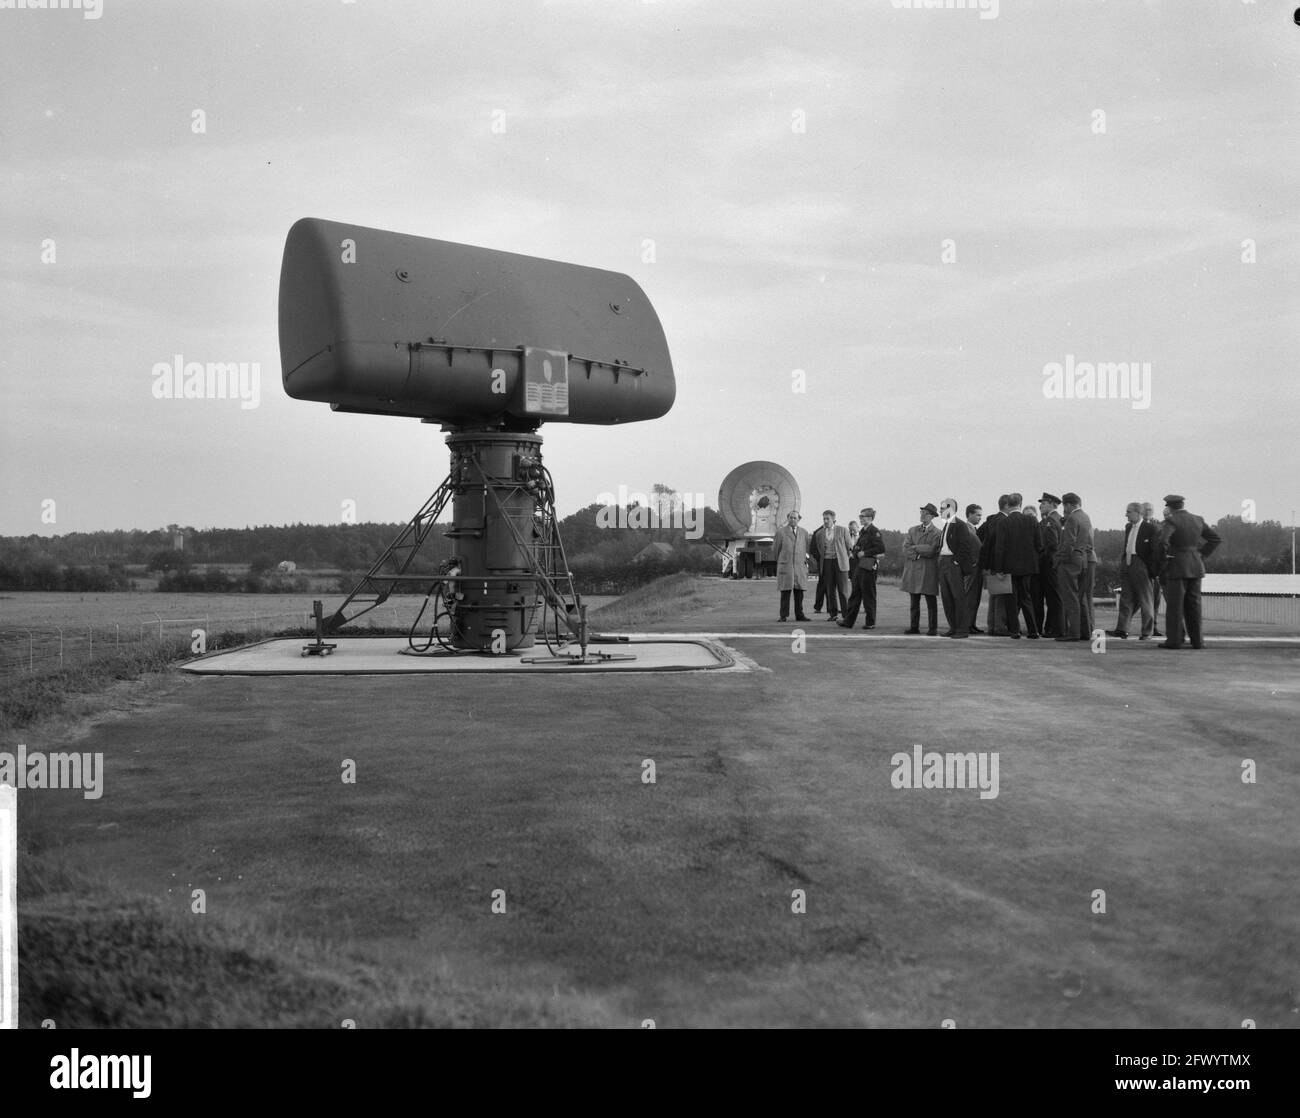 Transfer of rocket launch site in Germany. General H. Schaper, Calmeyer at radar. This is the first NIKE Hercules Ant-Aircraft Guided Missile site of 1 Group Guided Missiles near Handorf., October 10, 1961, launch sites, transfers, radars, missiles, The Netherlands, 20th century press agency photo, news to remember, documentary, historic photography 1945-1990, visual stories, human history of the Twentieth Century, capturing moments in time Stock Photo